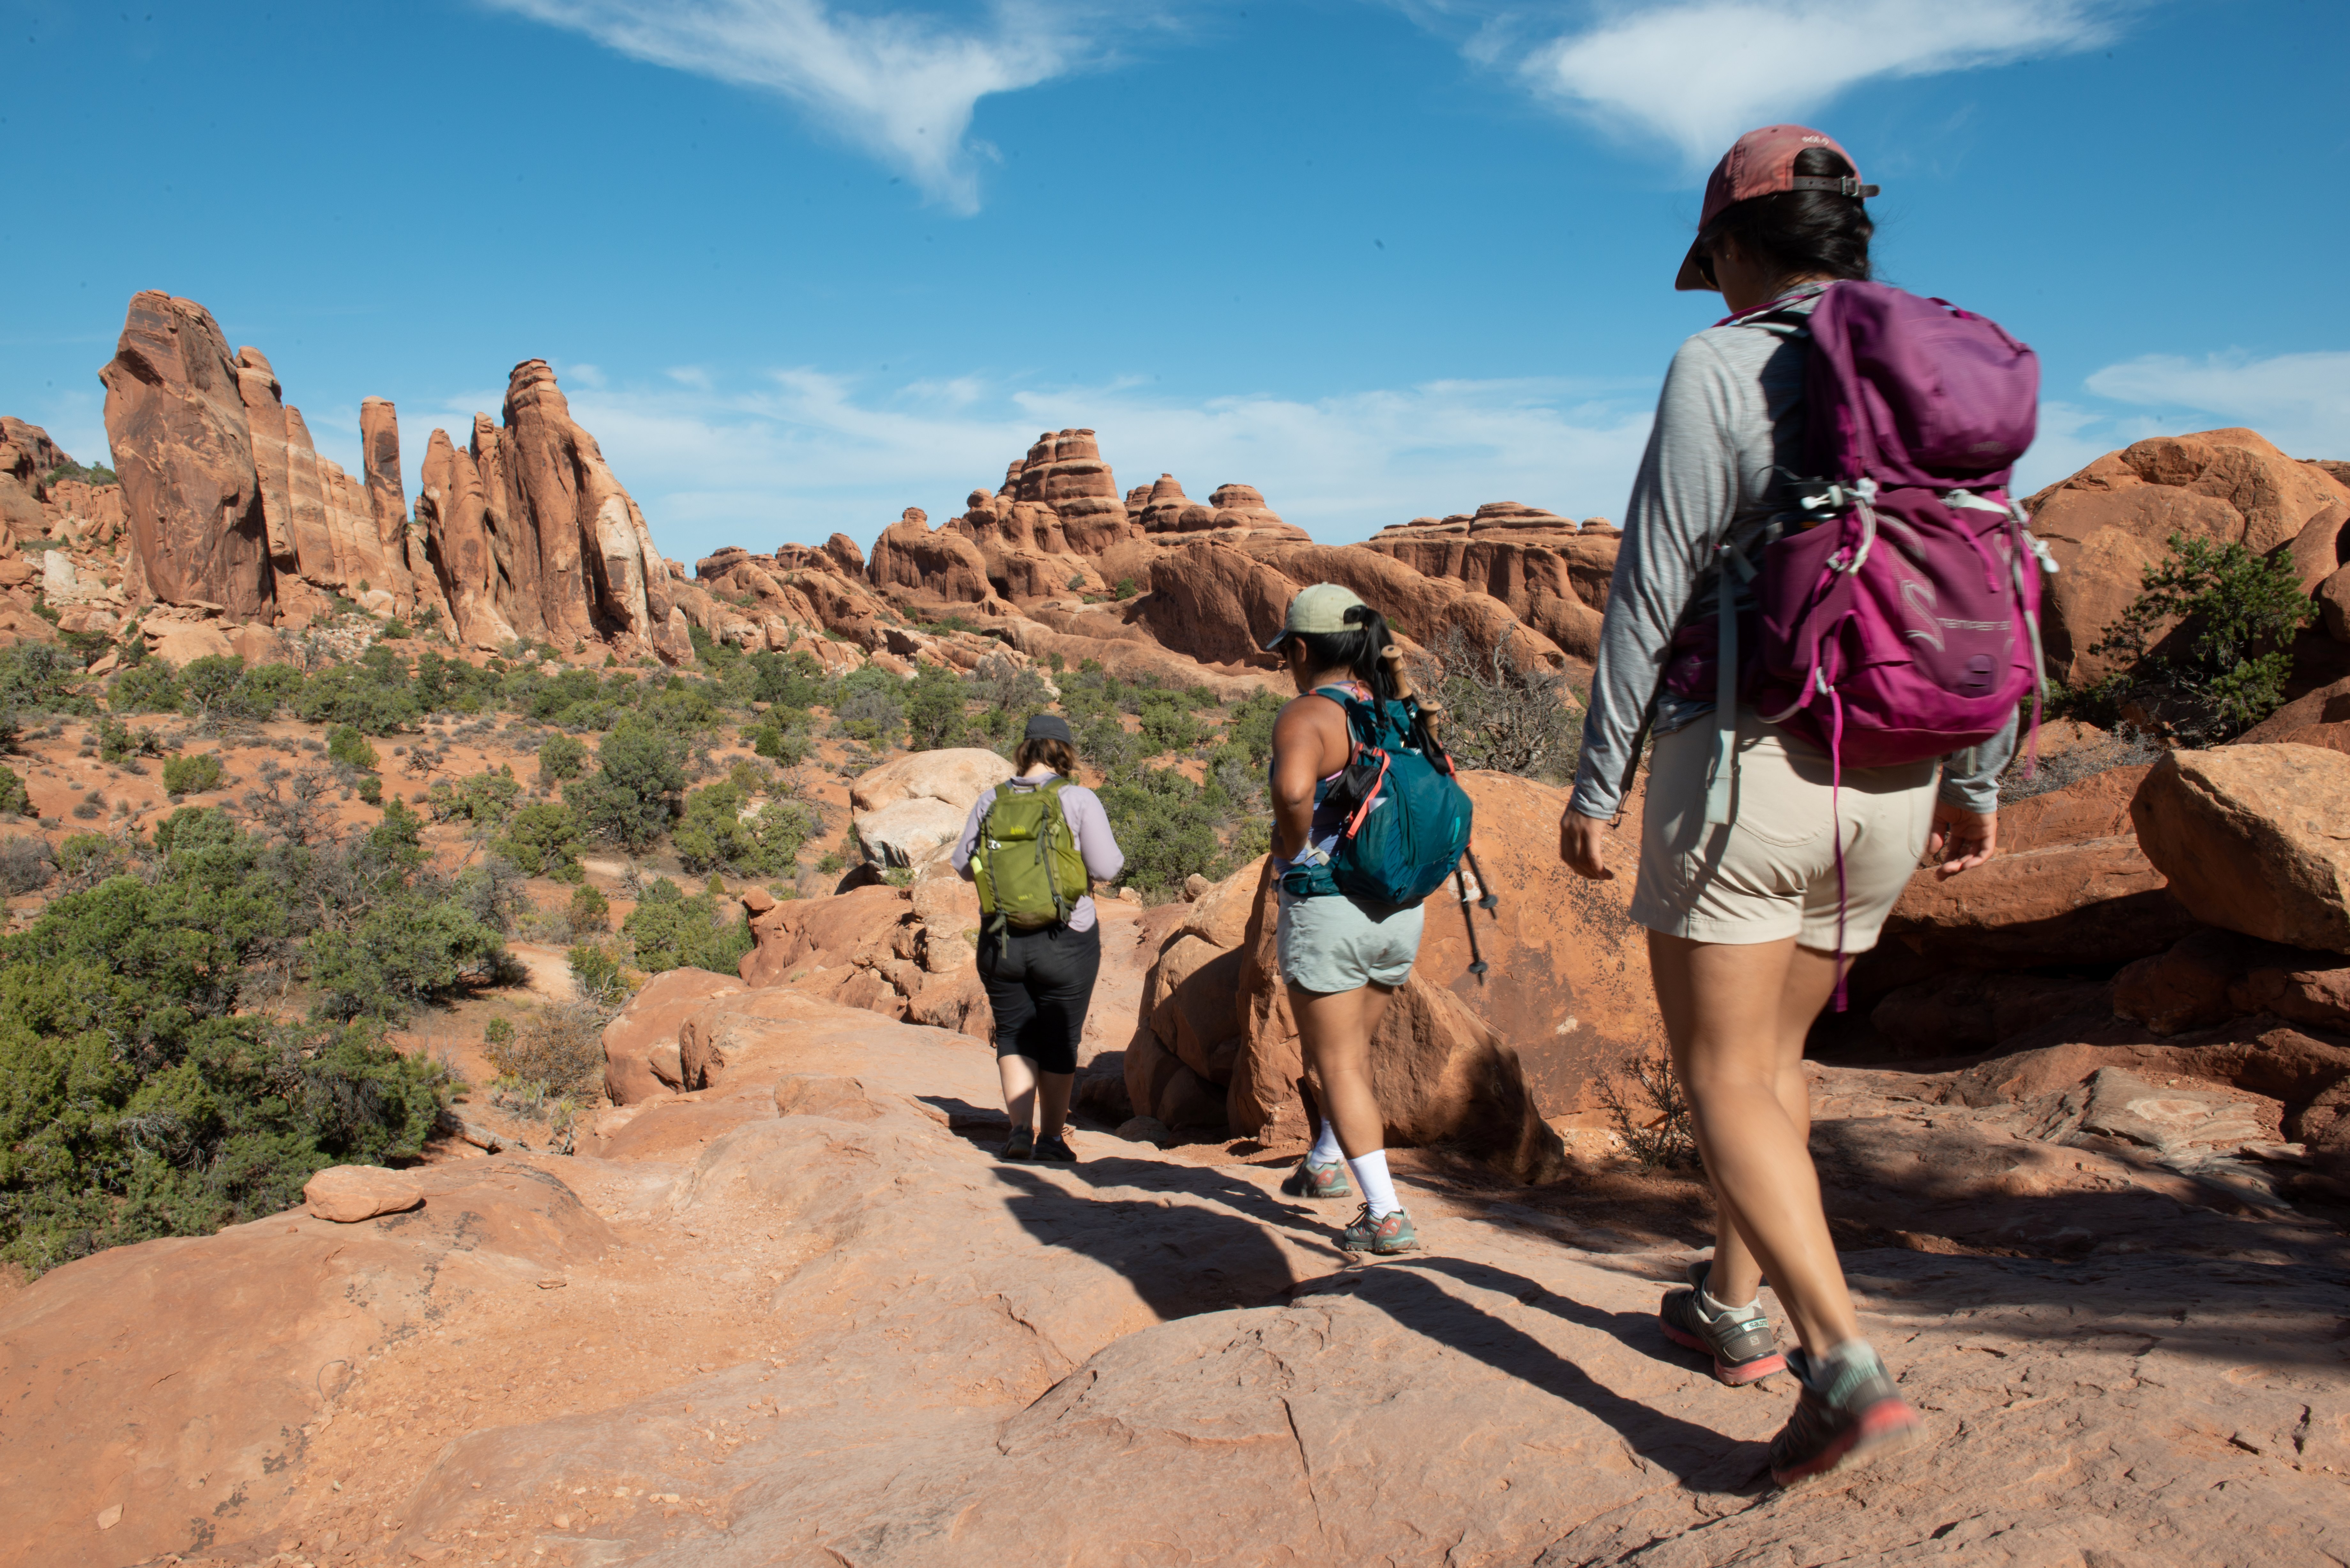 three hikers on rocky trail, desert shrubs and tall sandsone fins in background